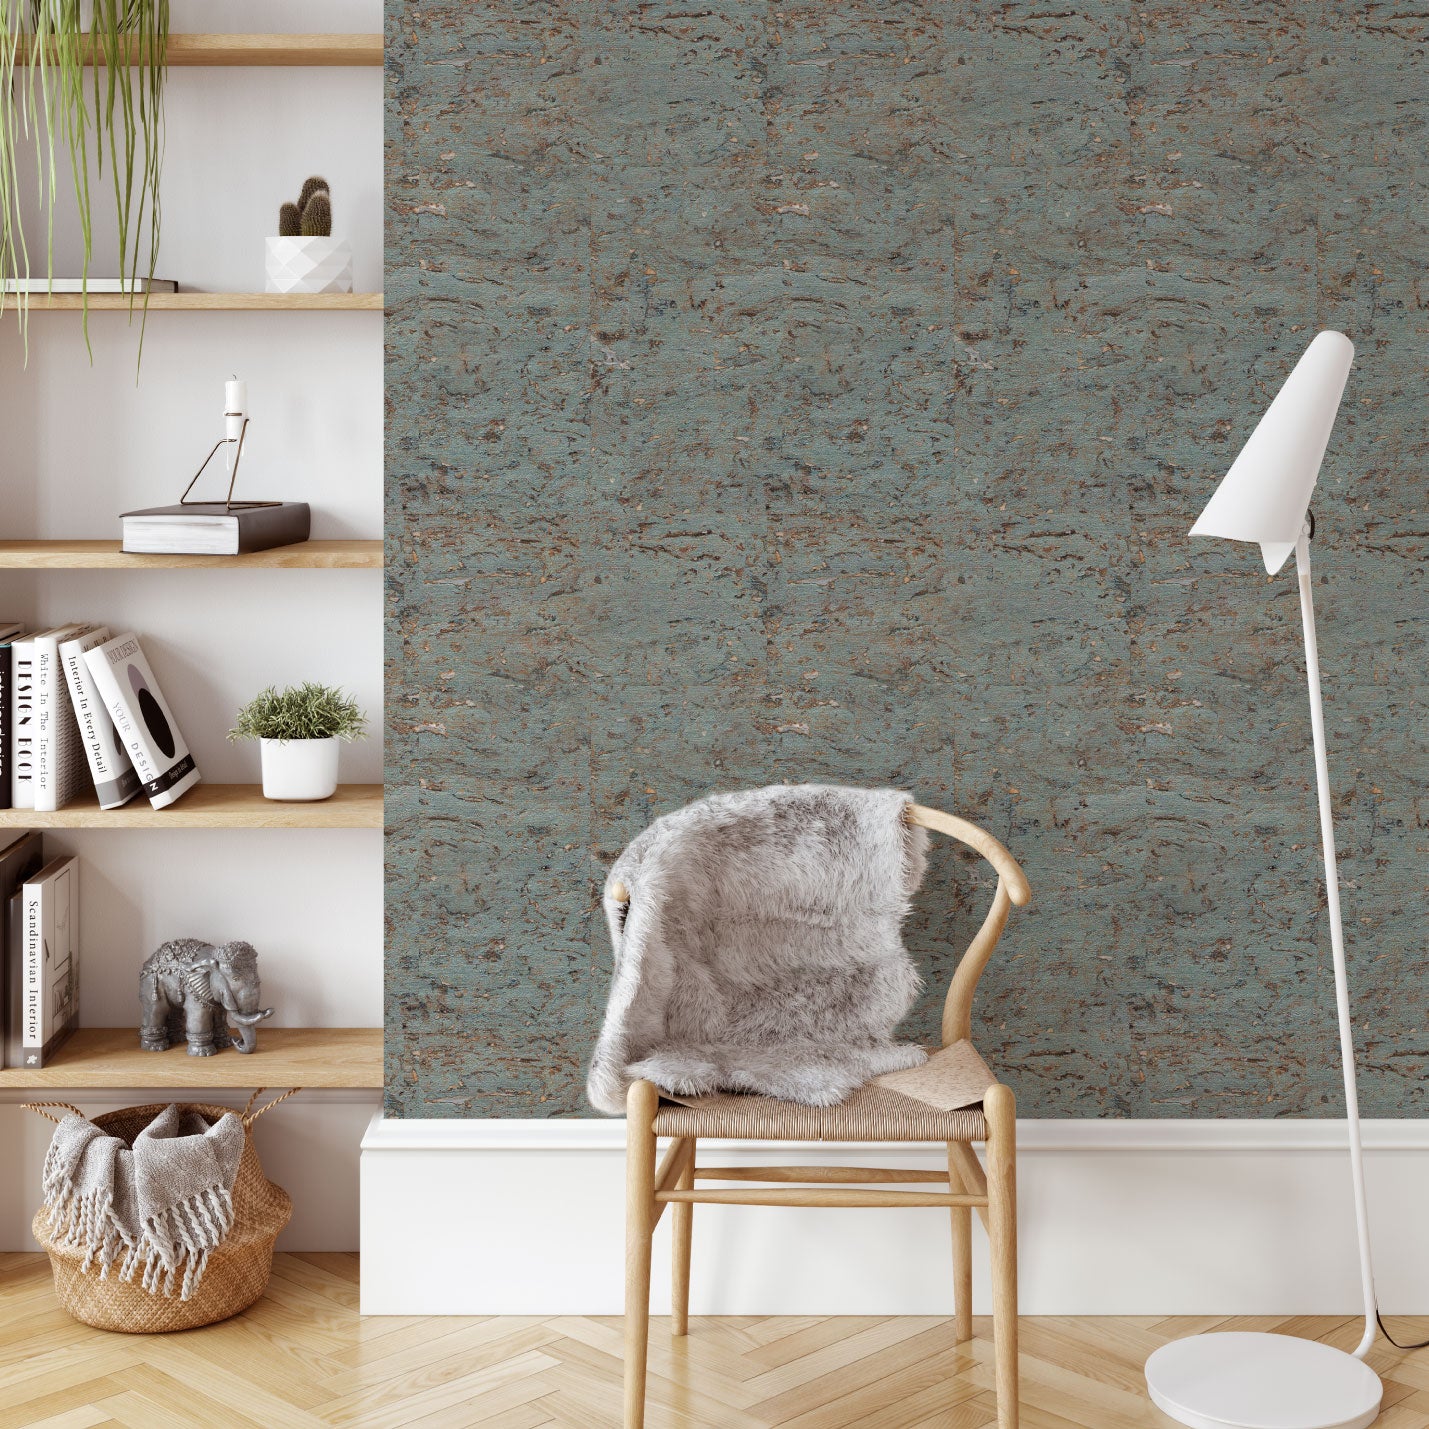 wallpaper Natural Textured Eco-Friendly Non-toxic High-quality Sustainable Interior Design Bold Custom Tailor-made Retro chic Bold cork rustic cabin cottage neutral moss green brown nature wood grain metallic shiny shine silver living room